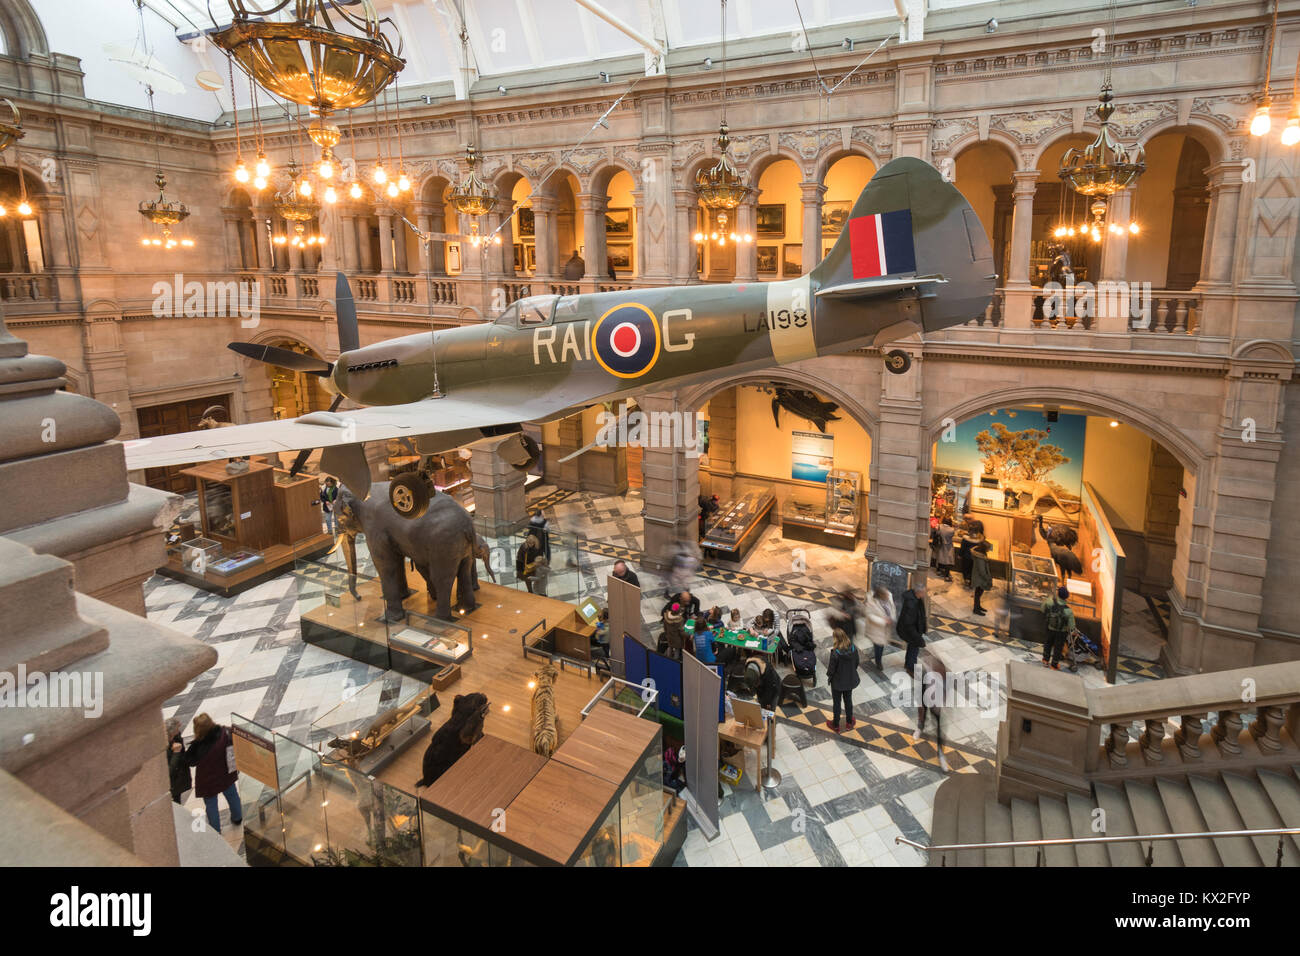 The Glasgow Spitfire at Kelvingrove Art Gallery and Museum, Glasgow, Scotland, UK Stock Photo